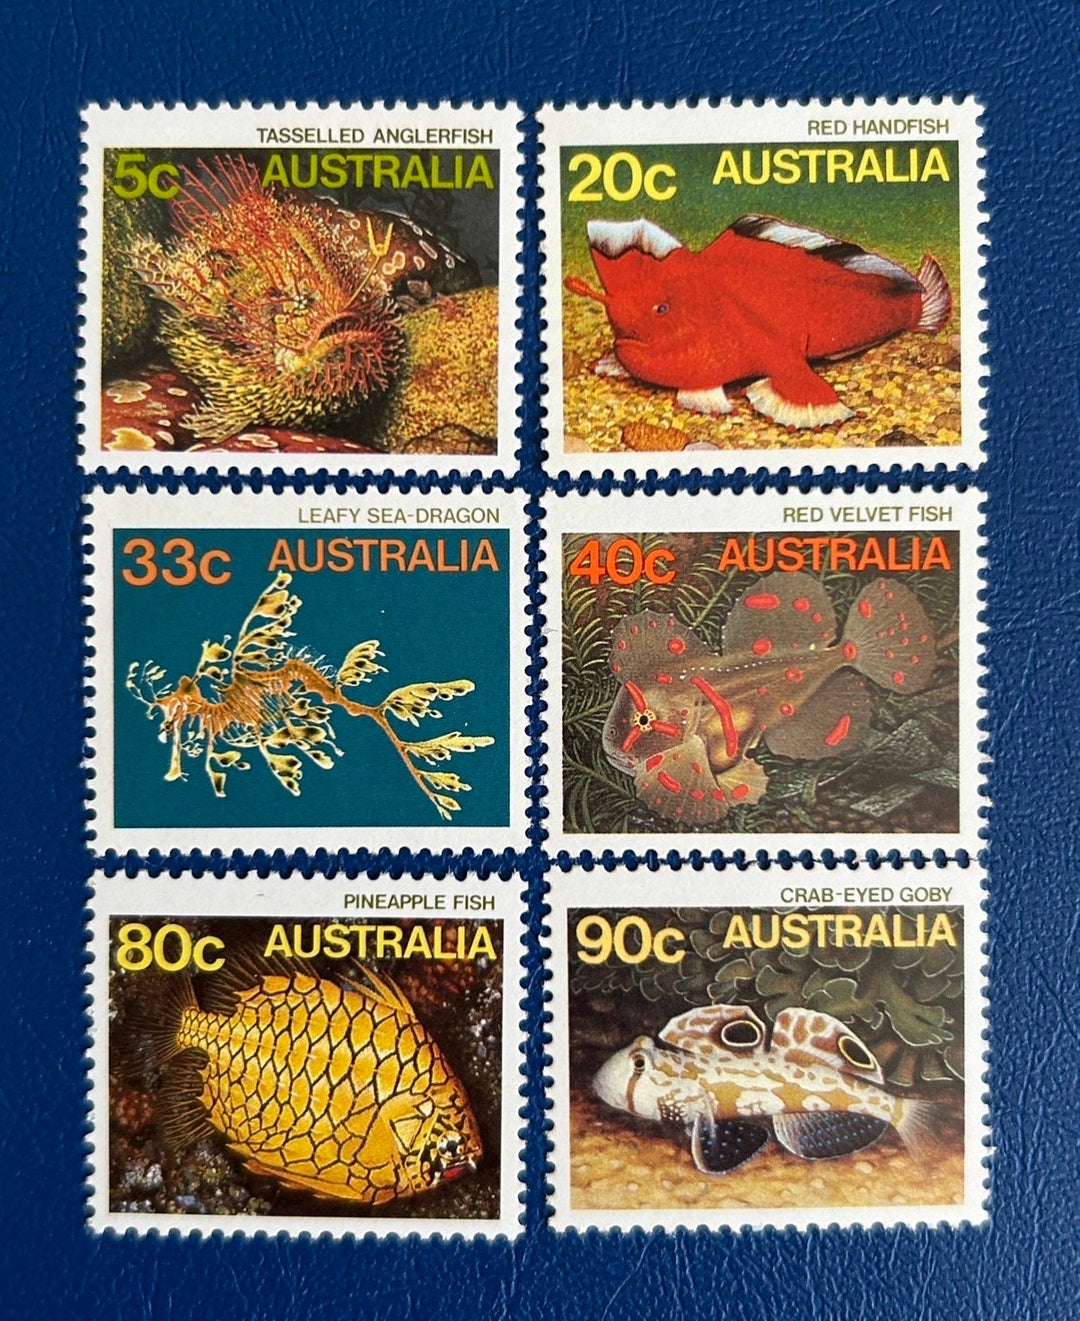 Australia - Original Vintage Postage Stamps - 1985 - Sea Life - for the collector, artist or crafter